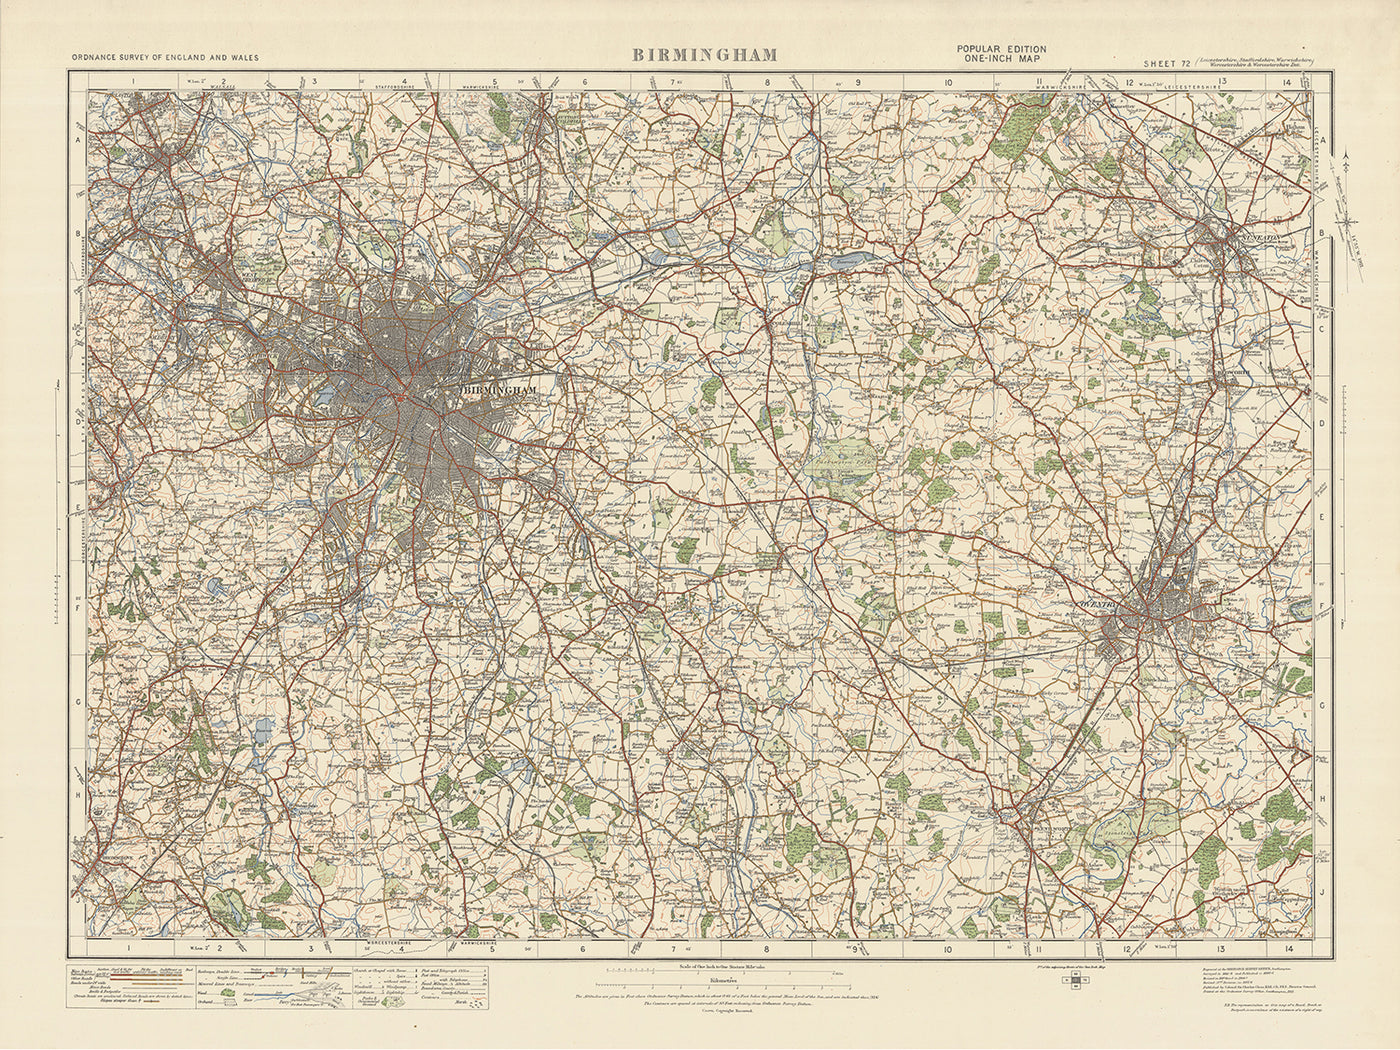 Carte Old Ordnance Survey, feuille 72 - Birmingham, 1925 : Coventry, Nuneaton, Solihull, Kenilworth, West Bromwich